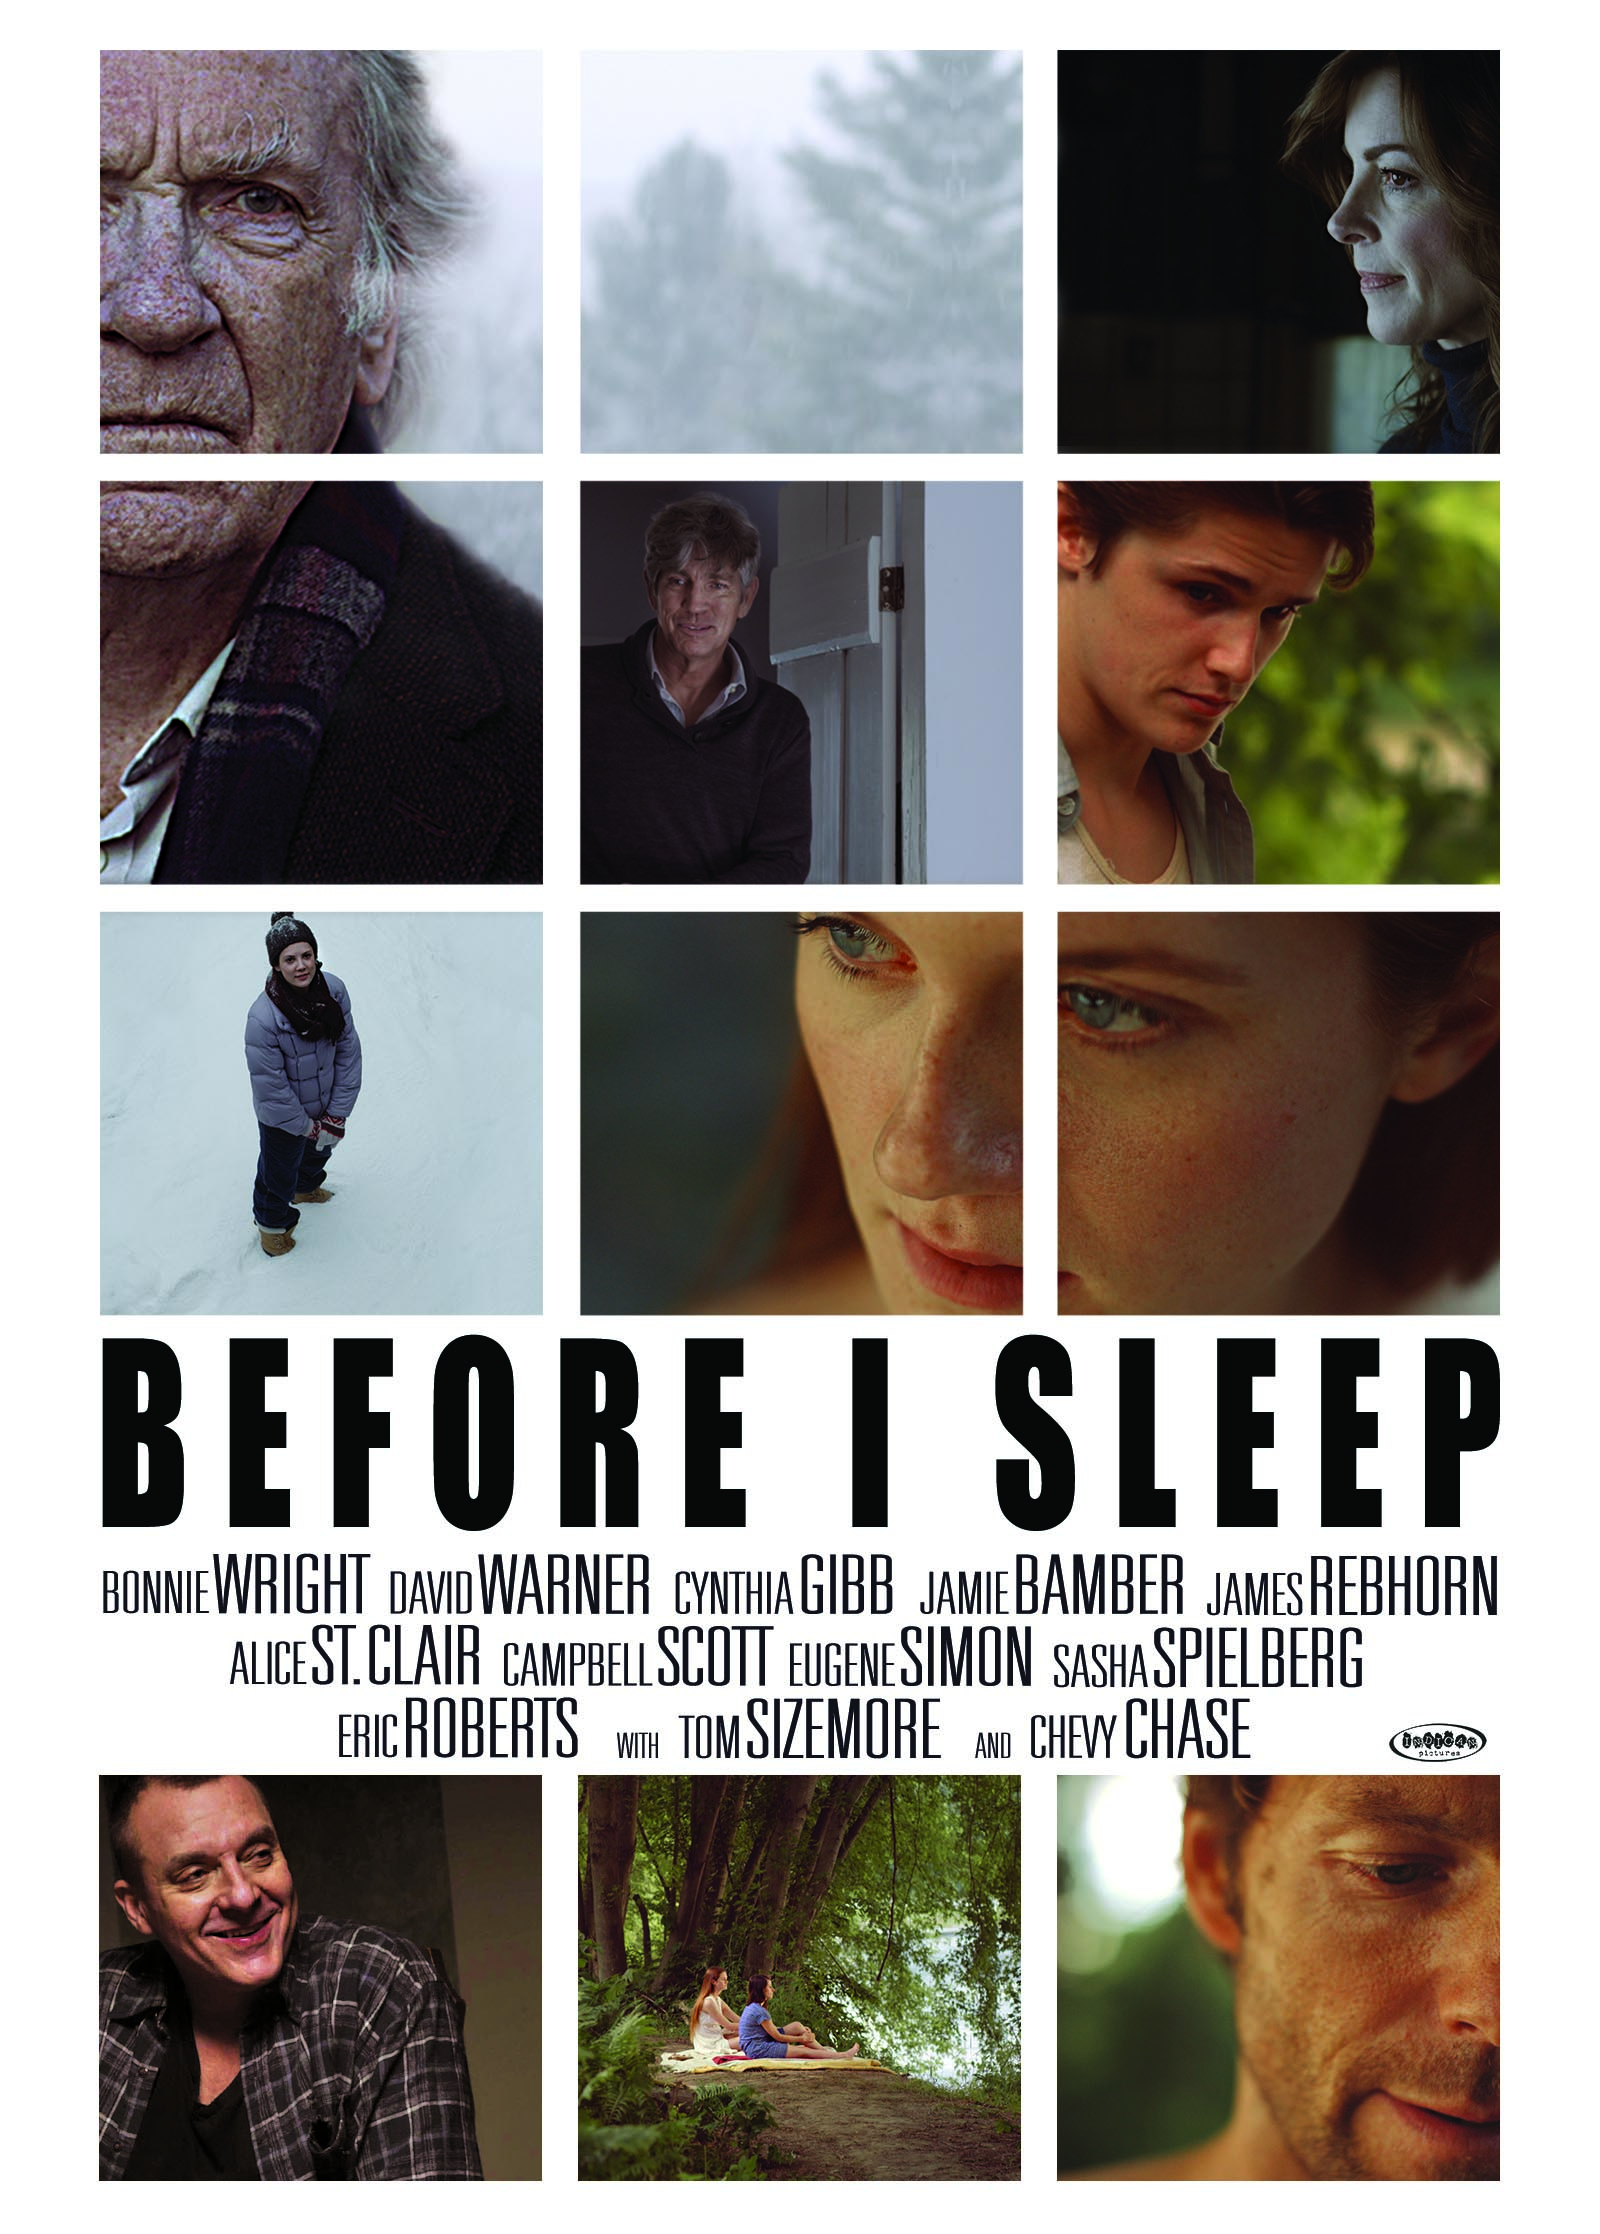 Eric Roberts, Cynthia Gibb, Campbell Scott, Tom Sizemore, David Warner, Jamie Bamber, James Rebhorn, Sasha Spielberg, Bonnie Wright, Eugene Simon, Caley Chase, Clare Foley and Alice St. Clair in Before I Sleep (2013)